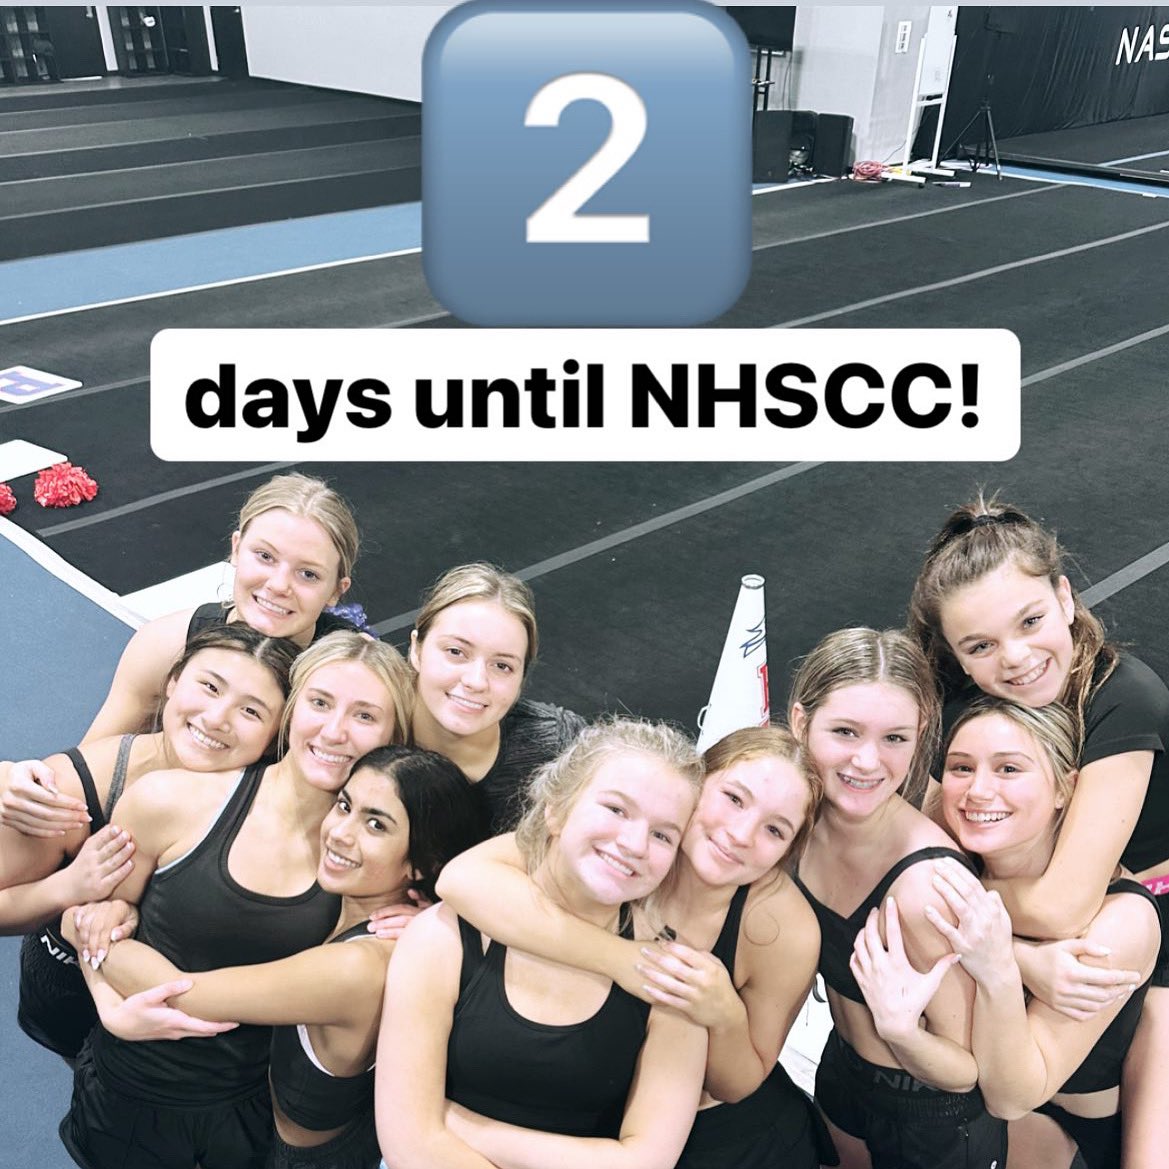 We are ready!!! @PageHSvCheer @wcsPHSathletics @PagePatriot_PTO @nhscc_